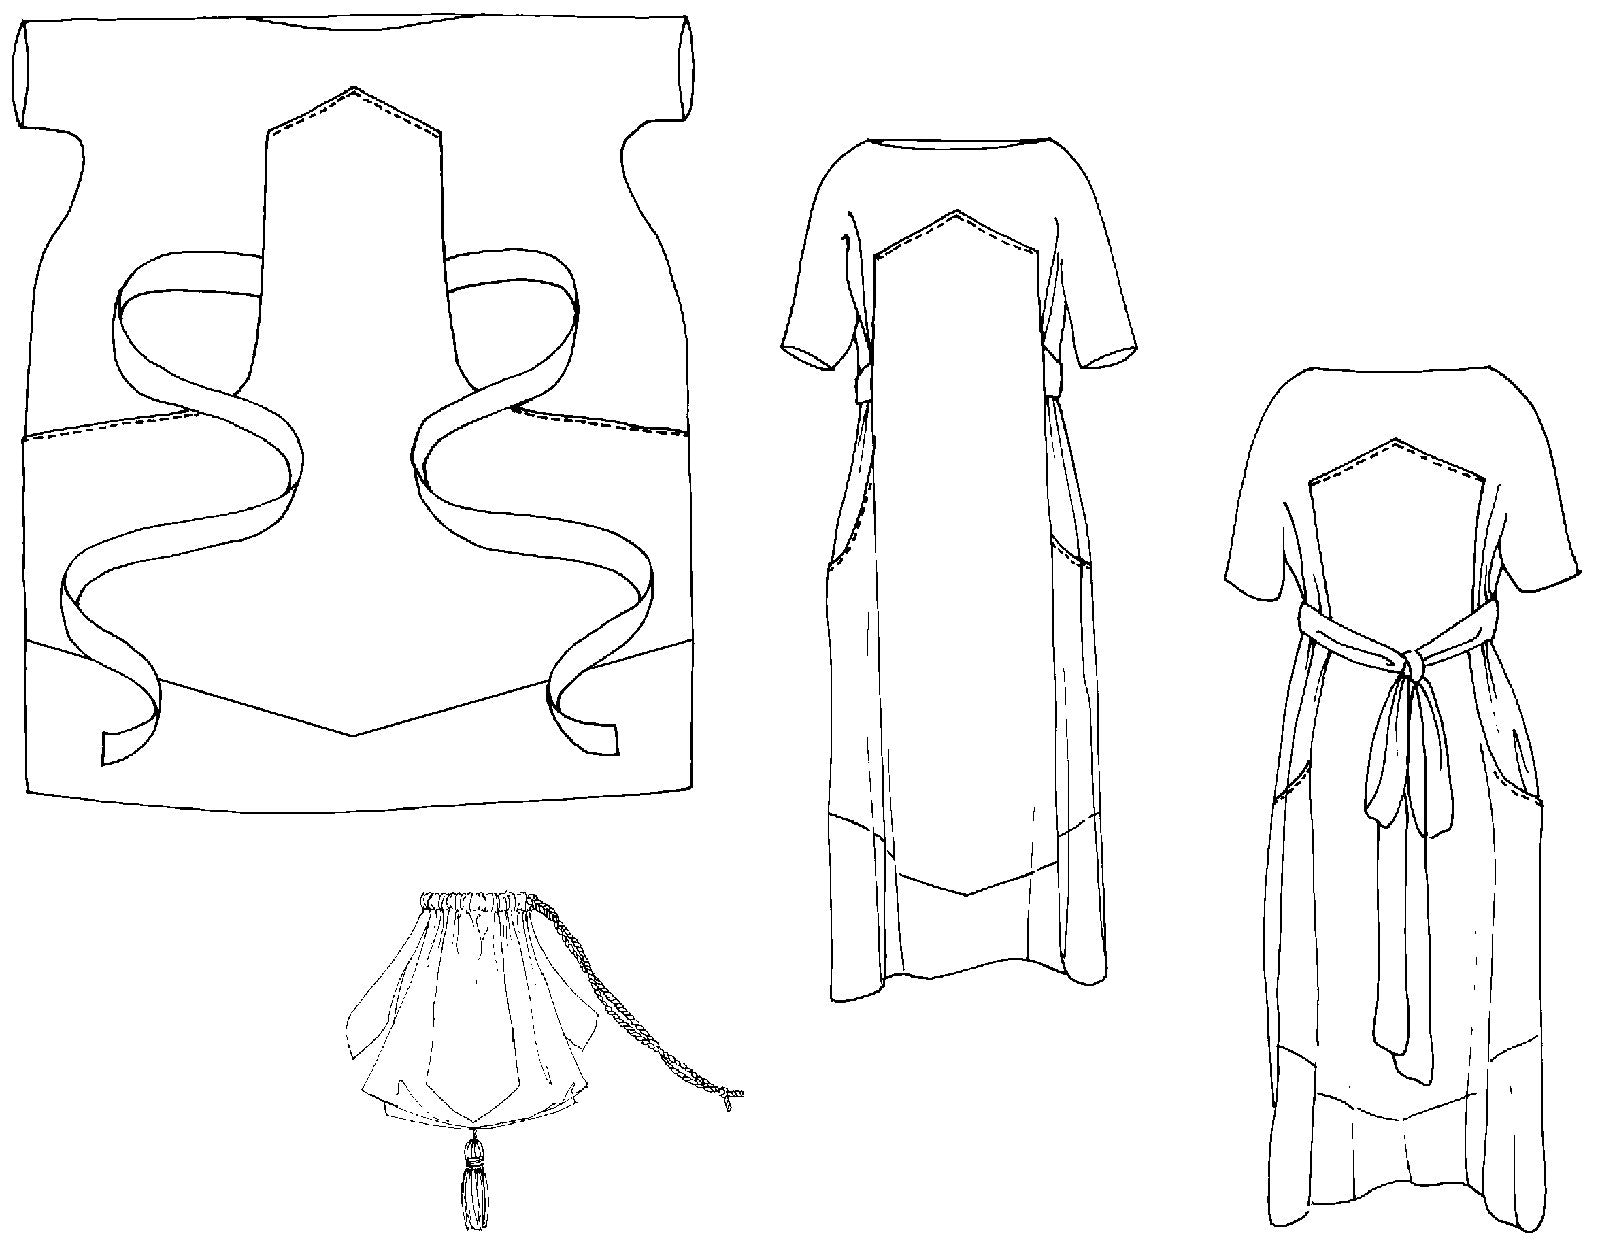 Black and White pattern drawings of the front and back view of the #261 Paris Promenade Dress, the attached bib shaped overdress, and the drawstring handbag.  